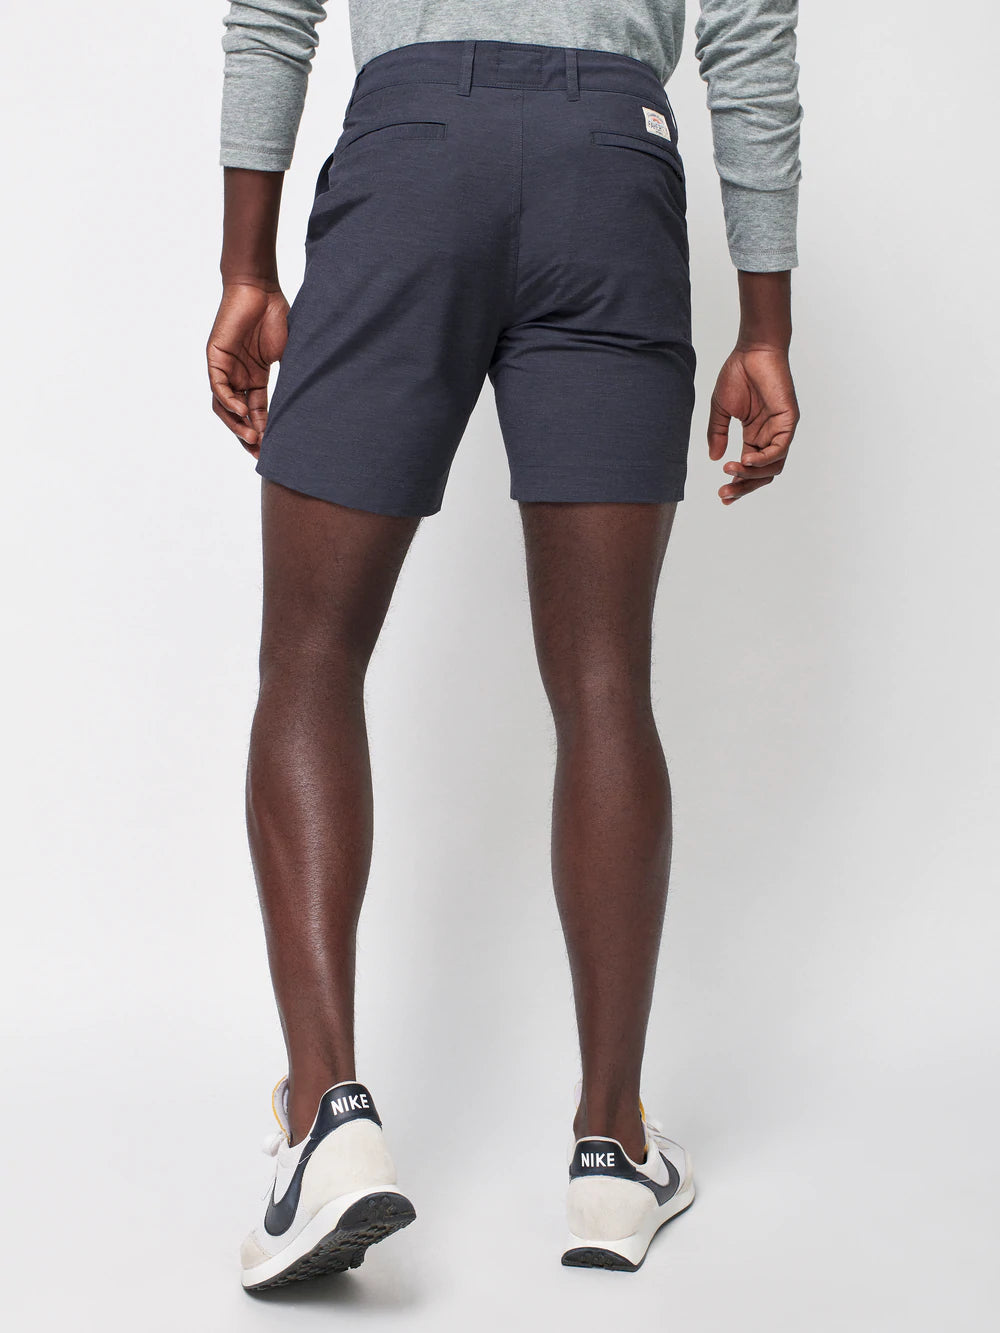 BELT LOOP ALL DAY SHORTS (7 IN) - CHARCOAL